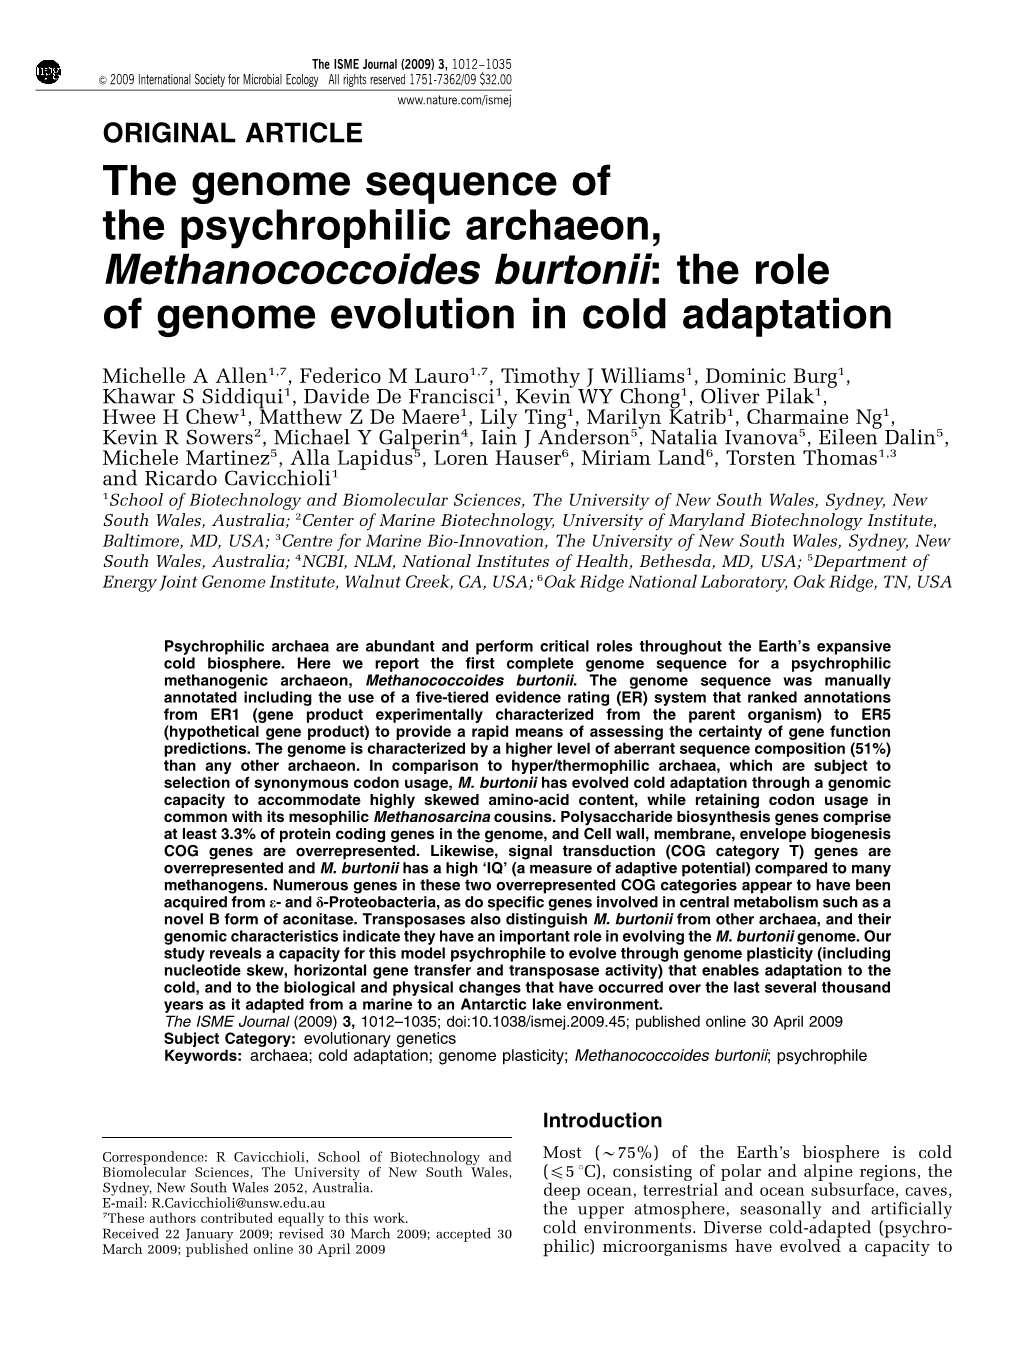 The Genome Sequence of the Psychrophilic Archaeon, Methanococcoides Burtonii: the Role of Genome Evolution in Cold Adaptation